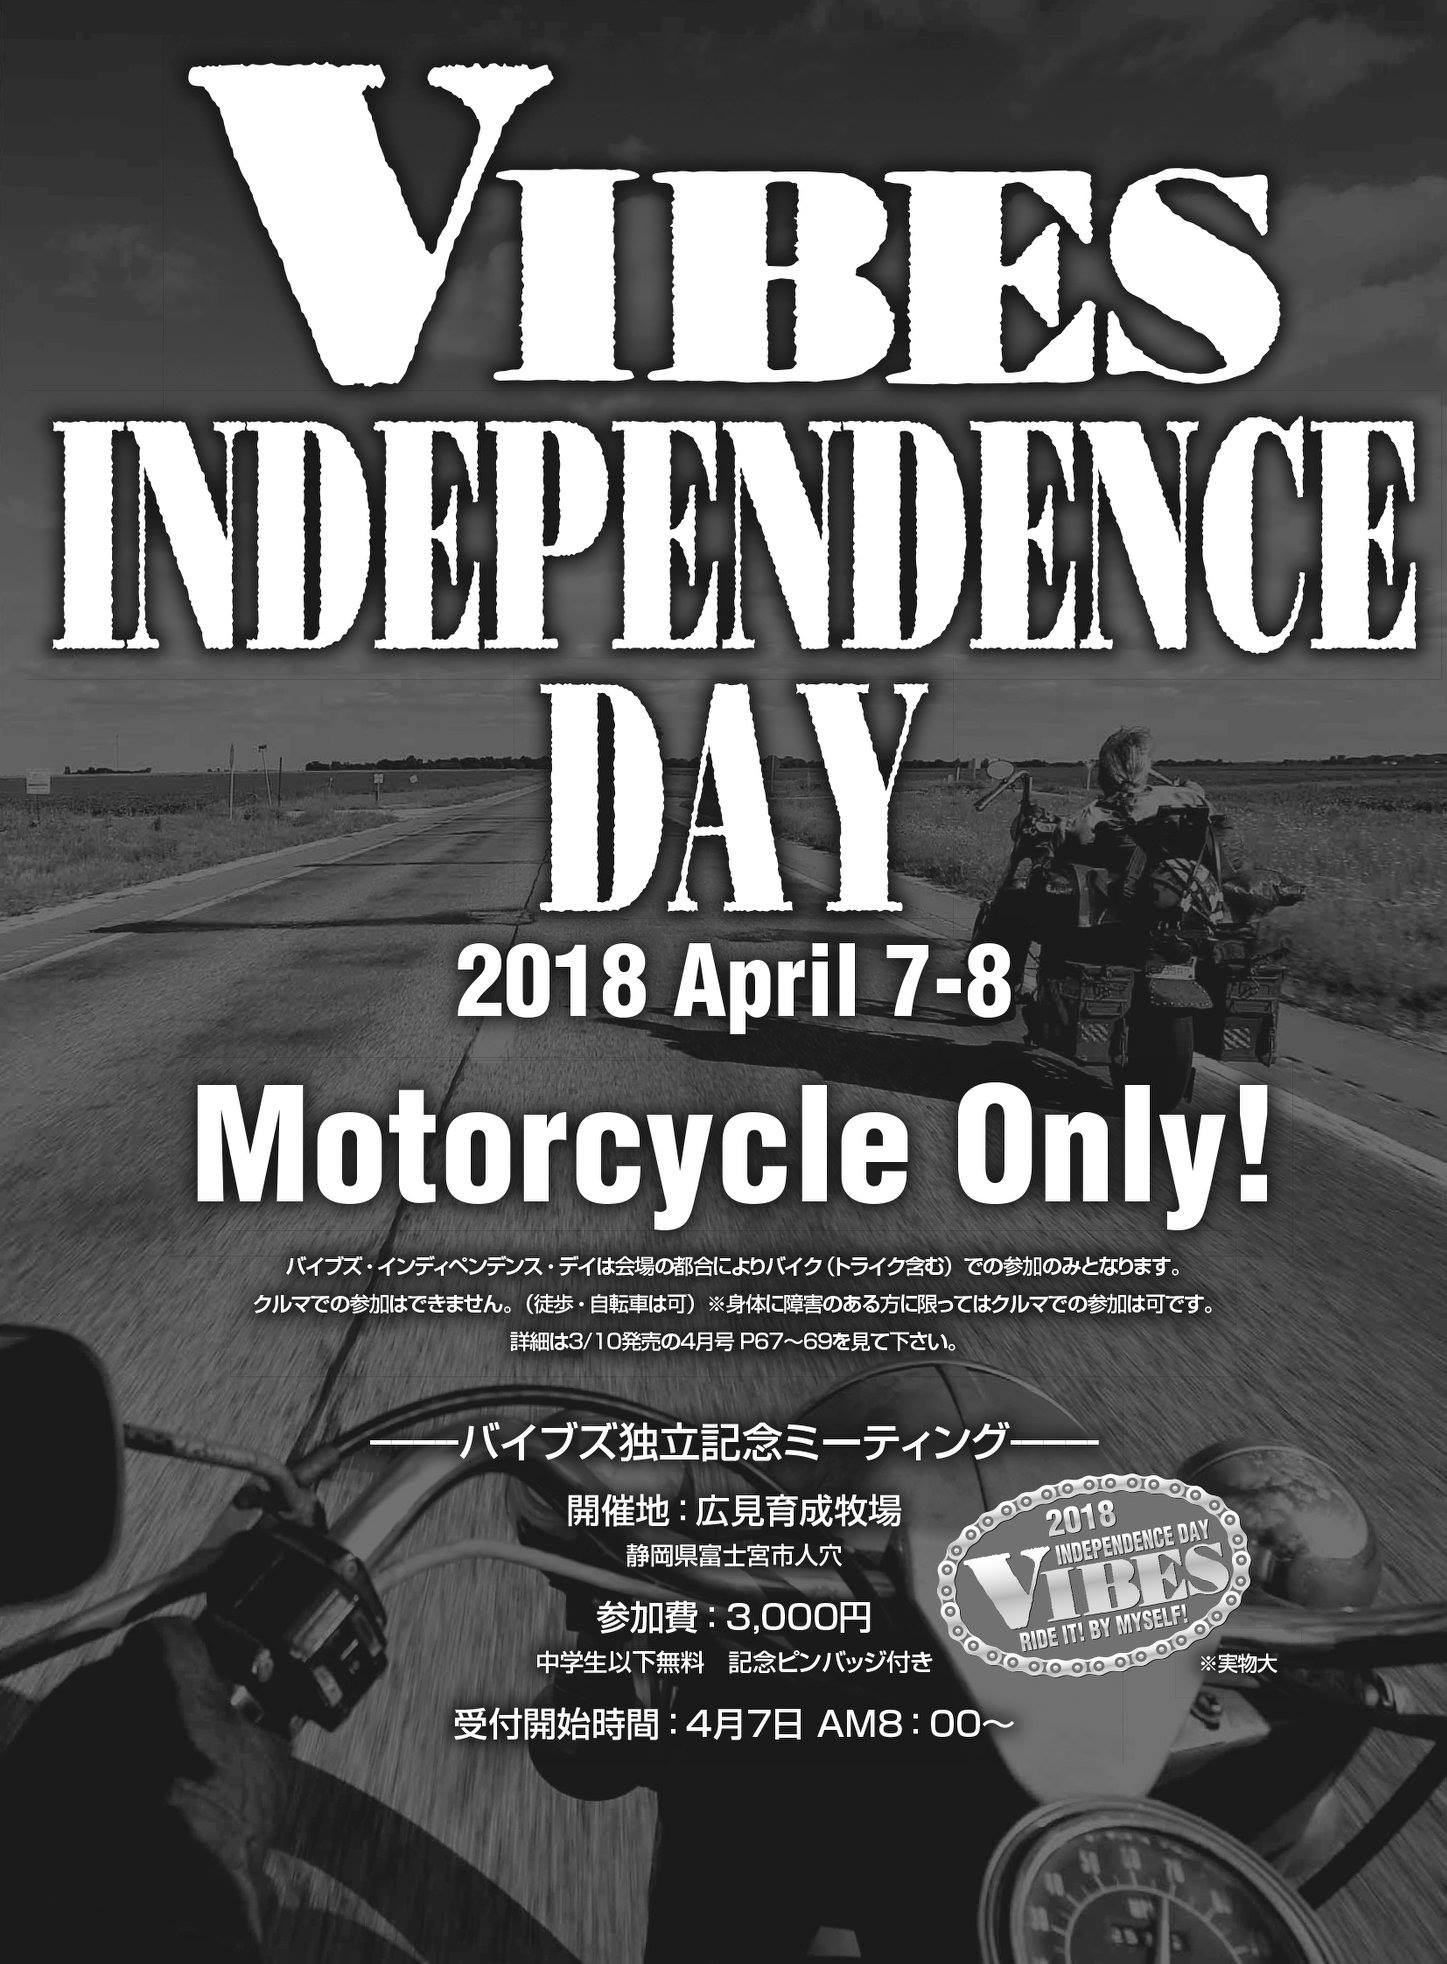 VIBES INDEPENDENCE DAY